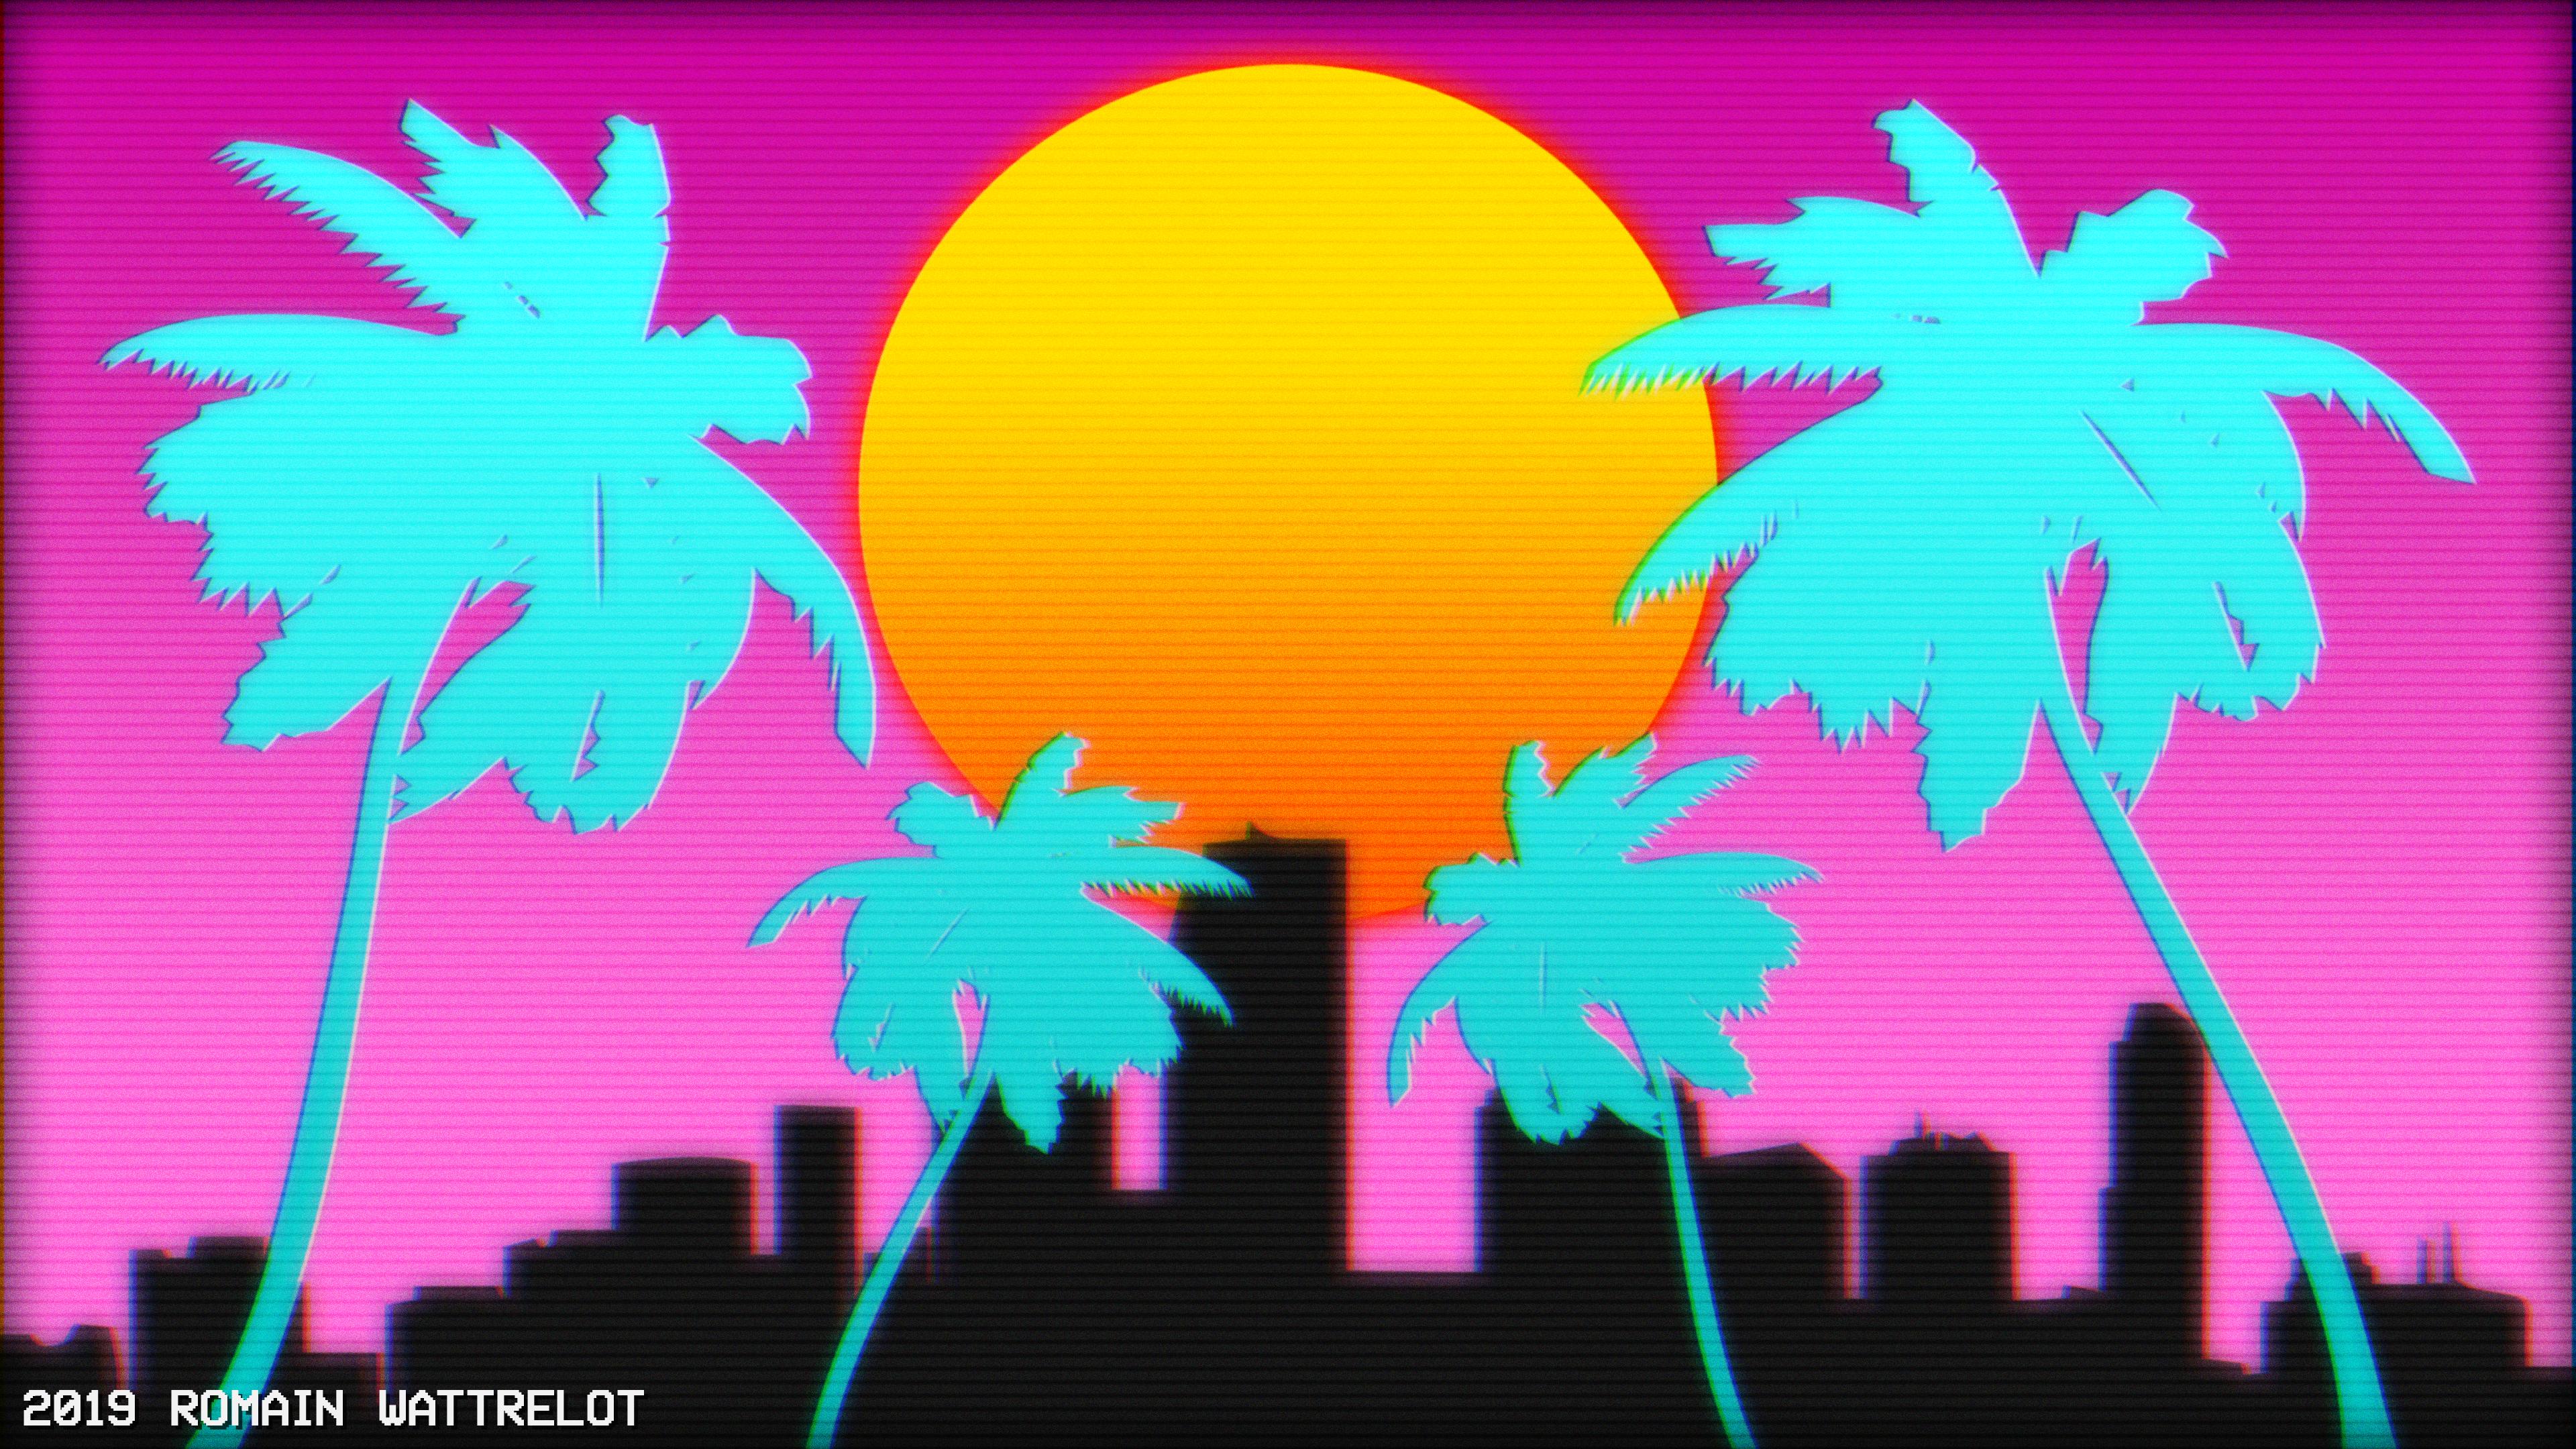 Miami Zoom Background Miami Vice Then And Now Thrillist Zoom Images